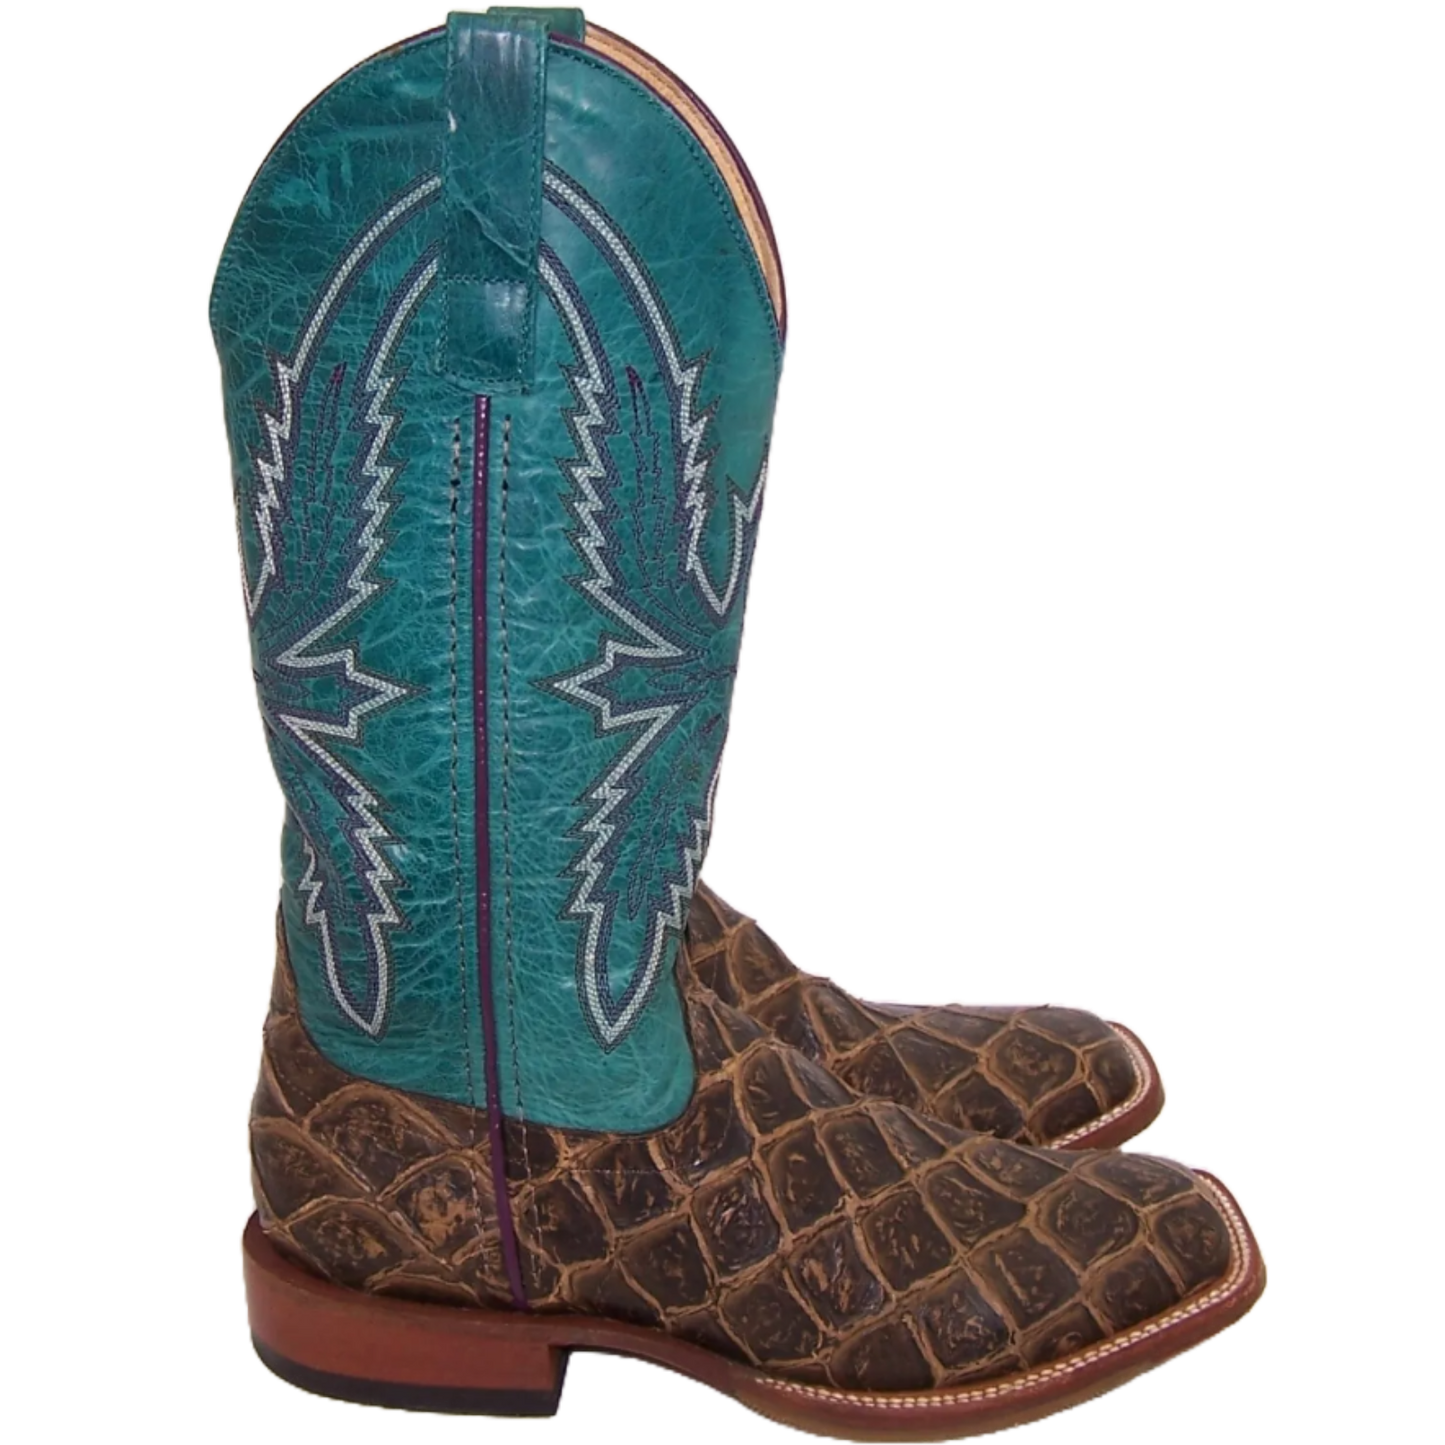 Macie Bean Ladies Reely Good Time Brown & Turquoise Square Toe Boots M9120